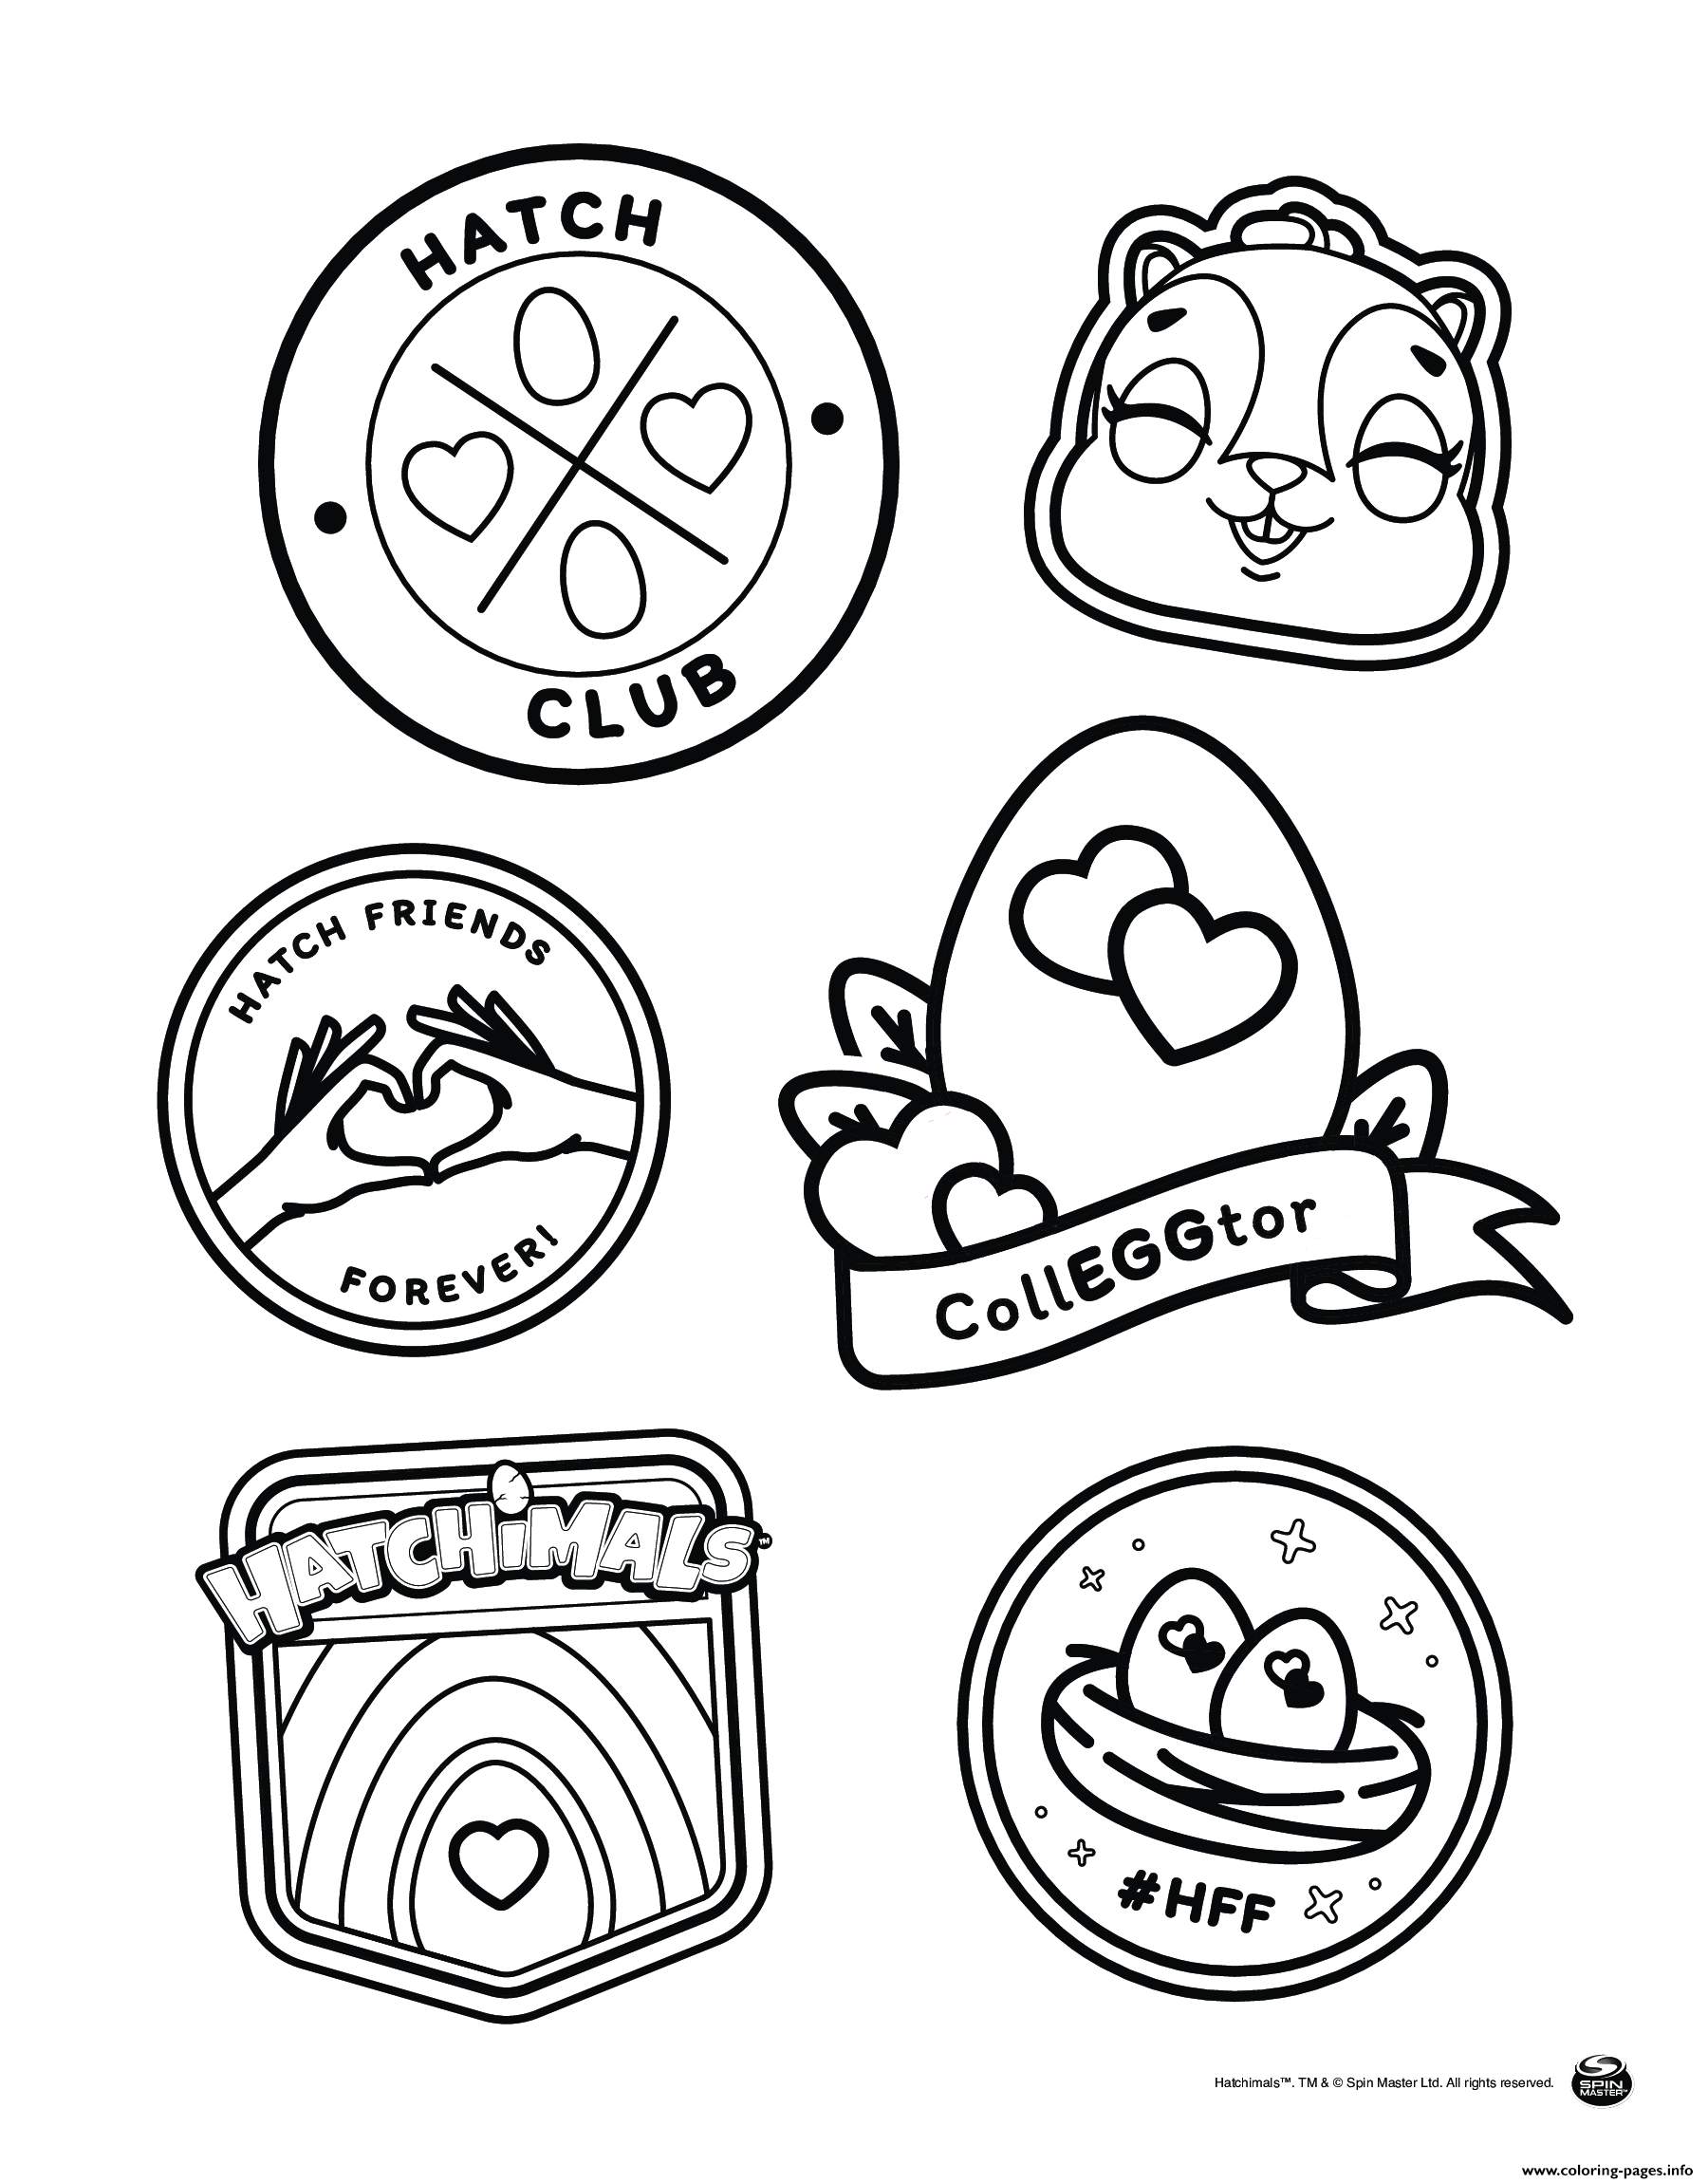 Color Your Own Hatch Club Patches coloring